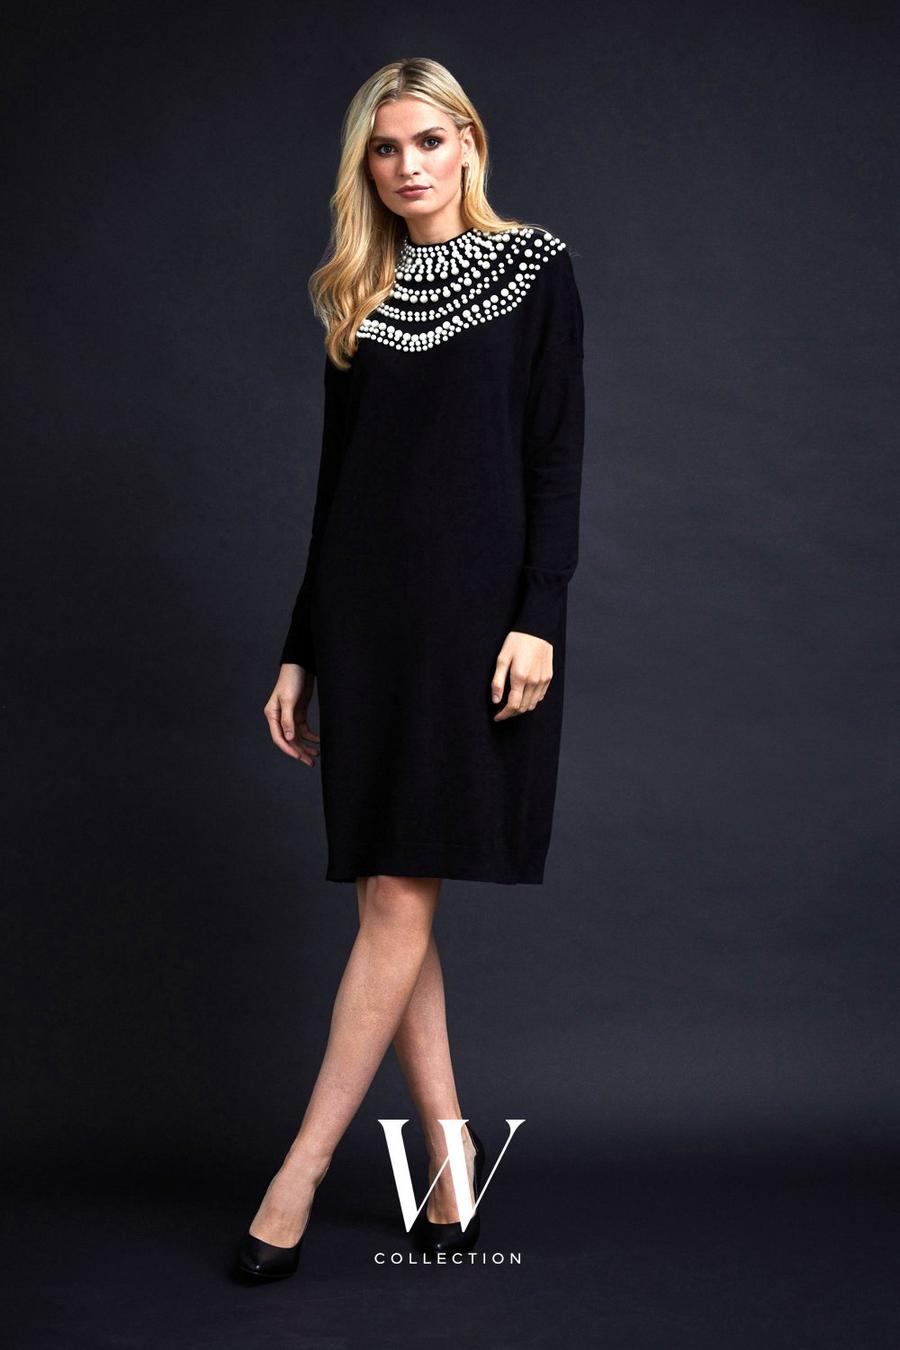 Pearl Necklace Black High Neck Knitted Dress